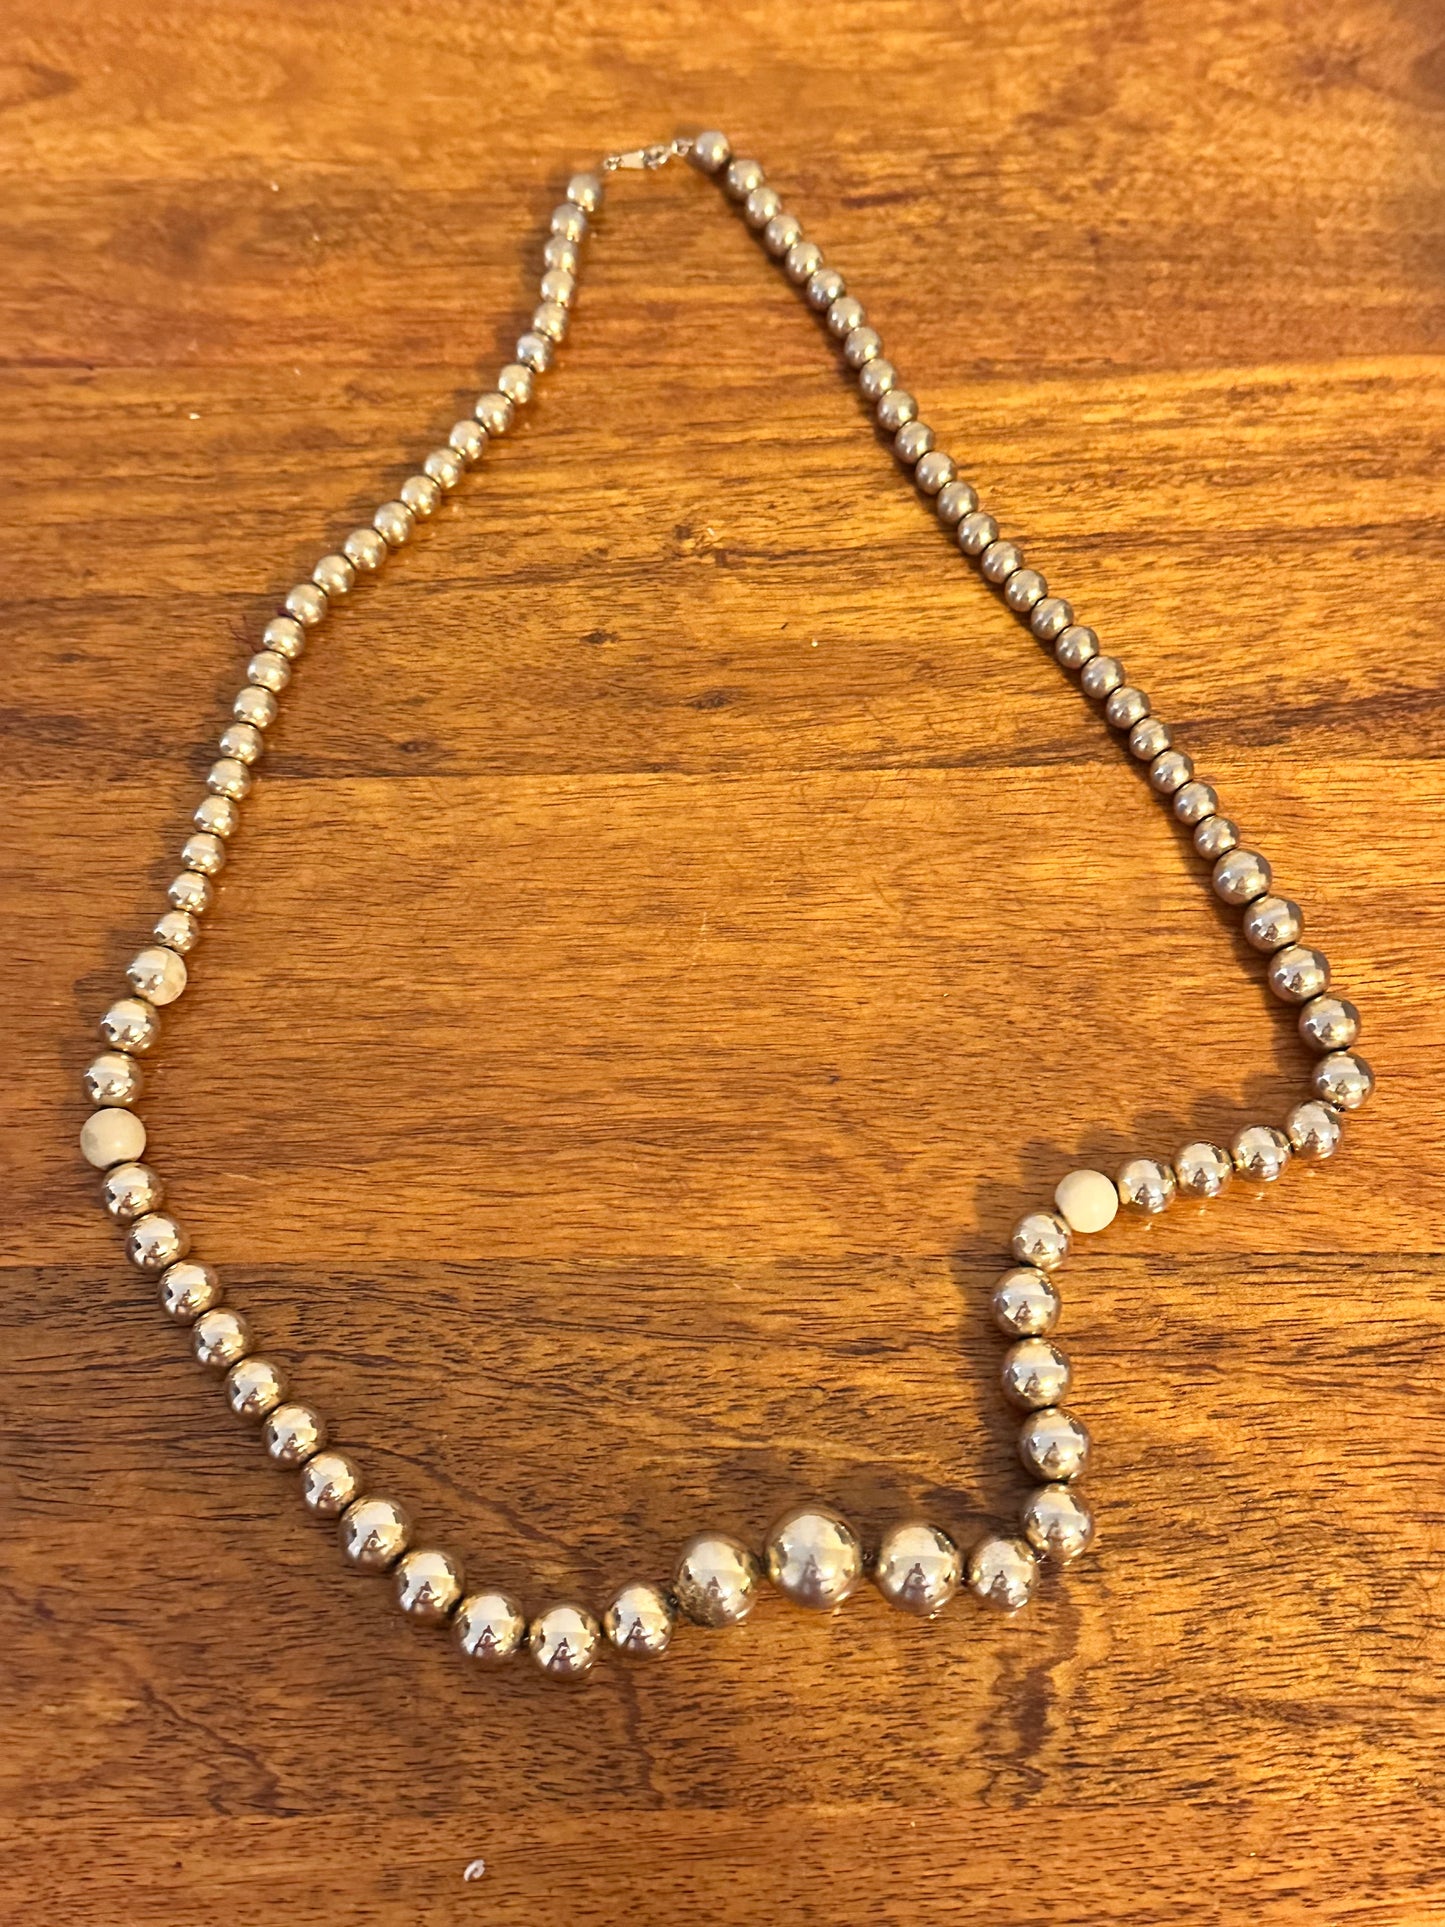 MAD MEN: Betty’s Vintage Necklace Collection